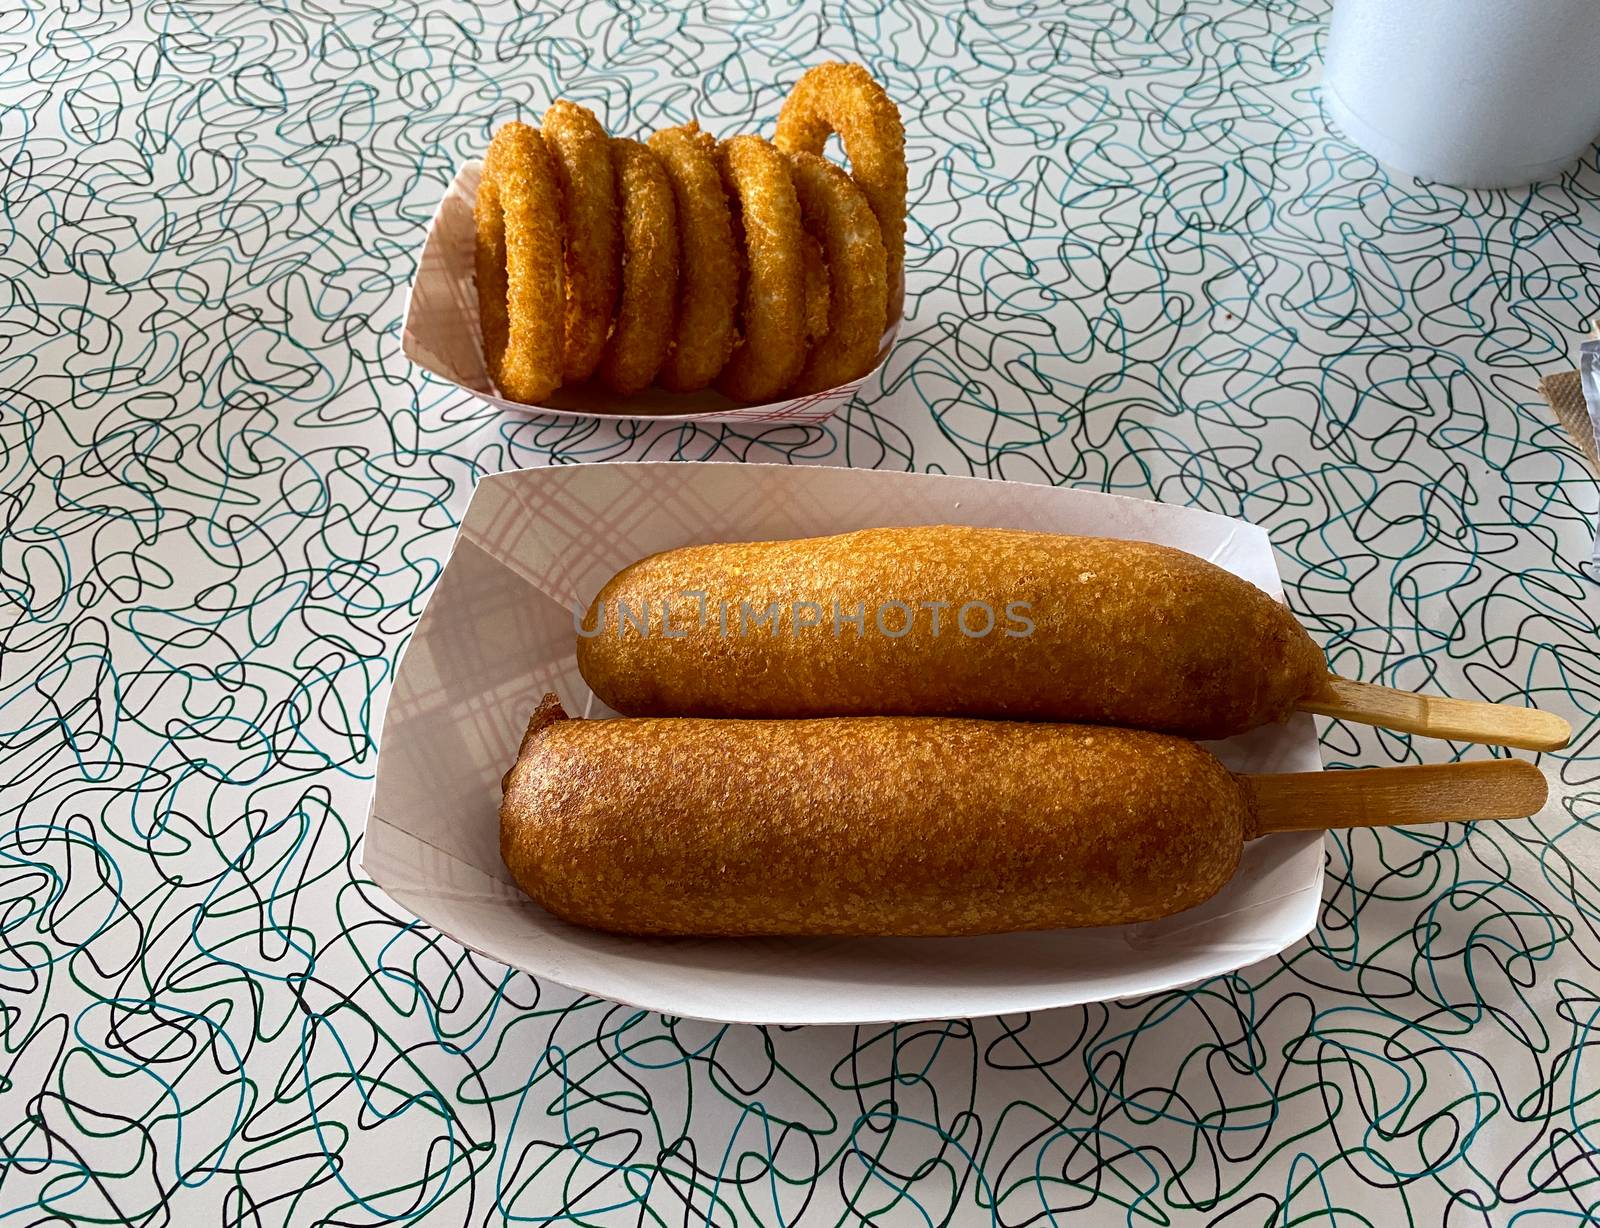 Two corndogs and a side of onion rings meal at a fast food restaurant.